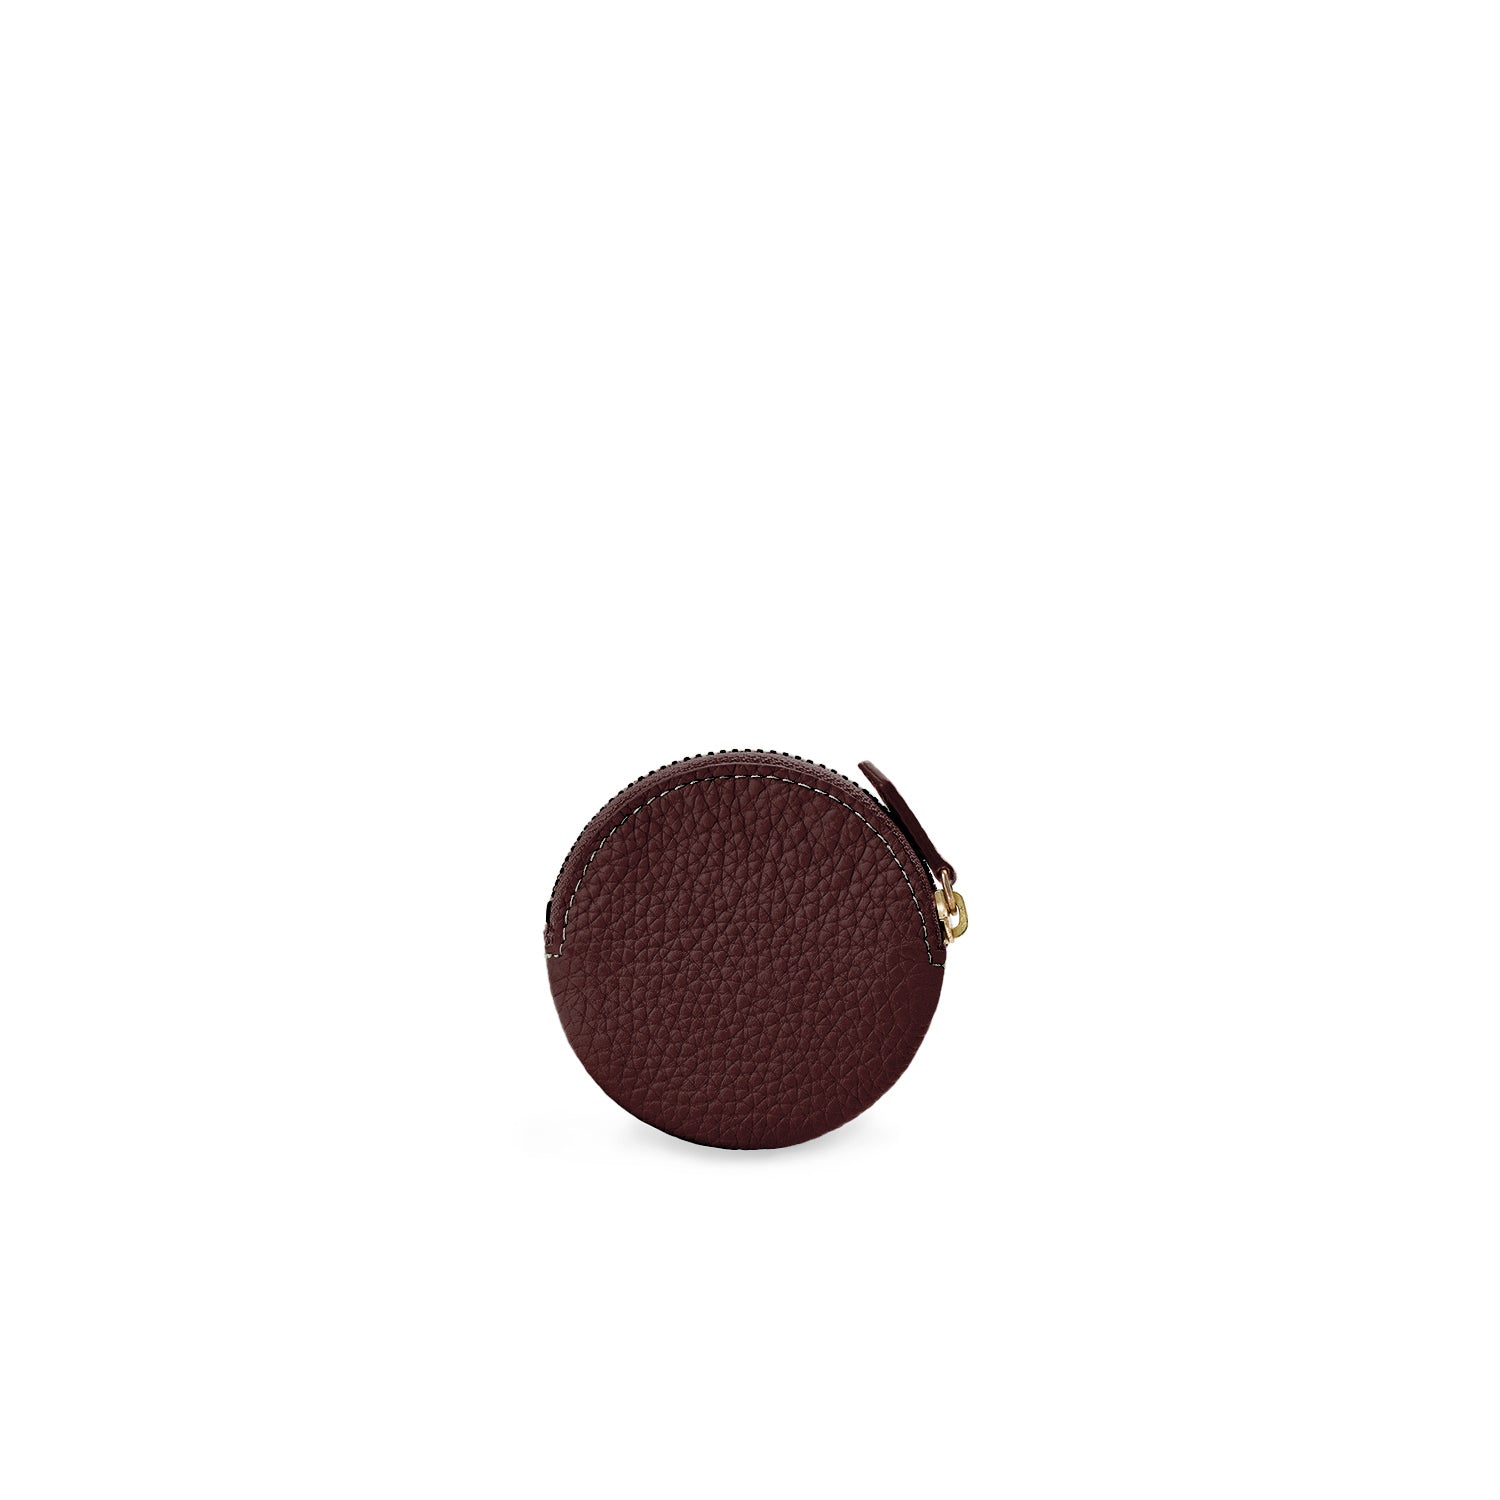 Round coin case in shrunk leather